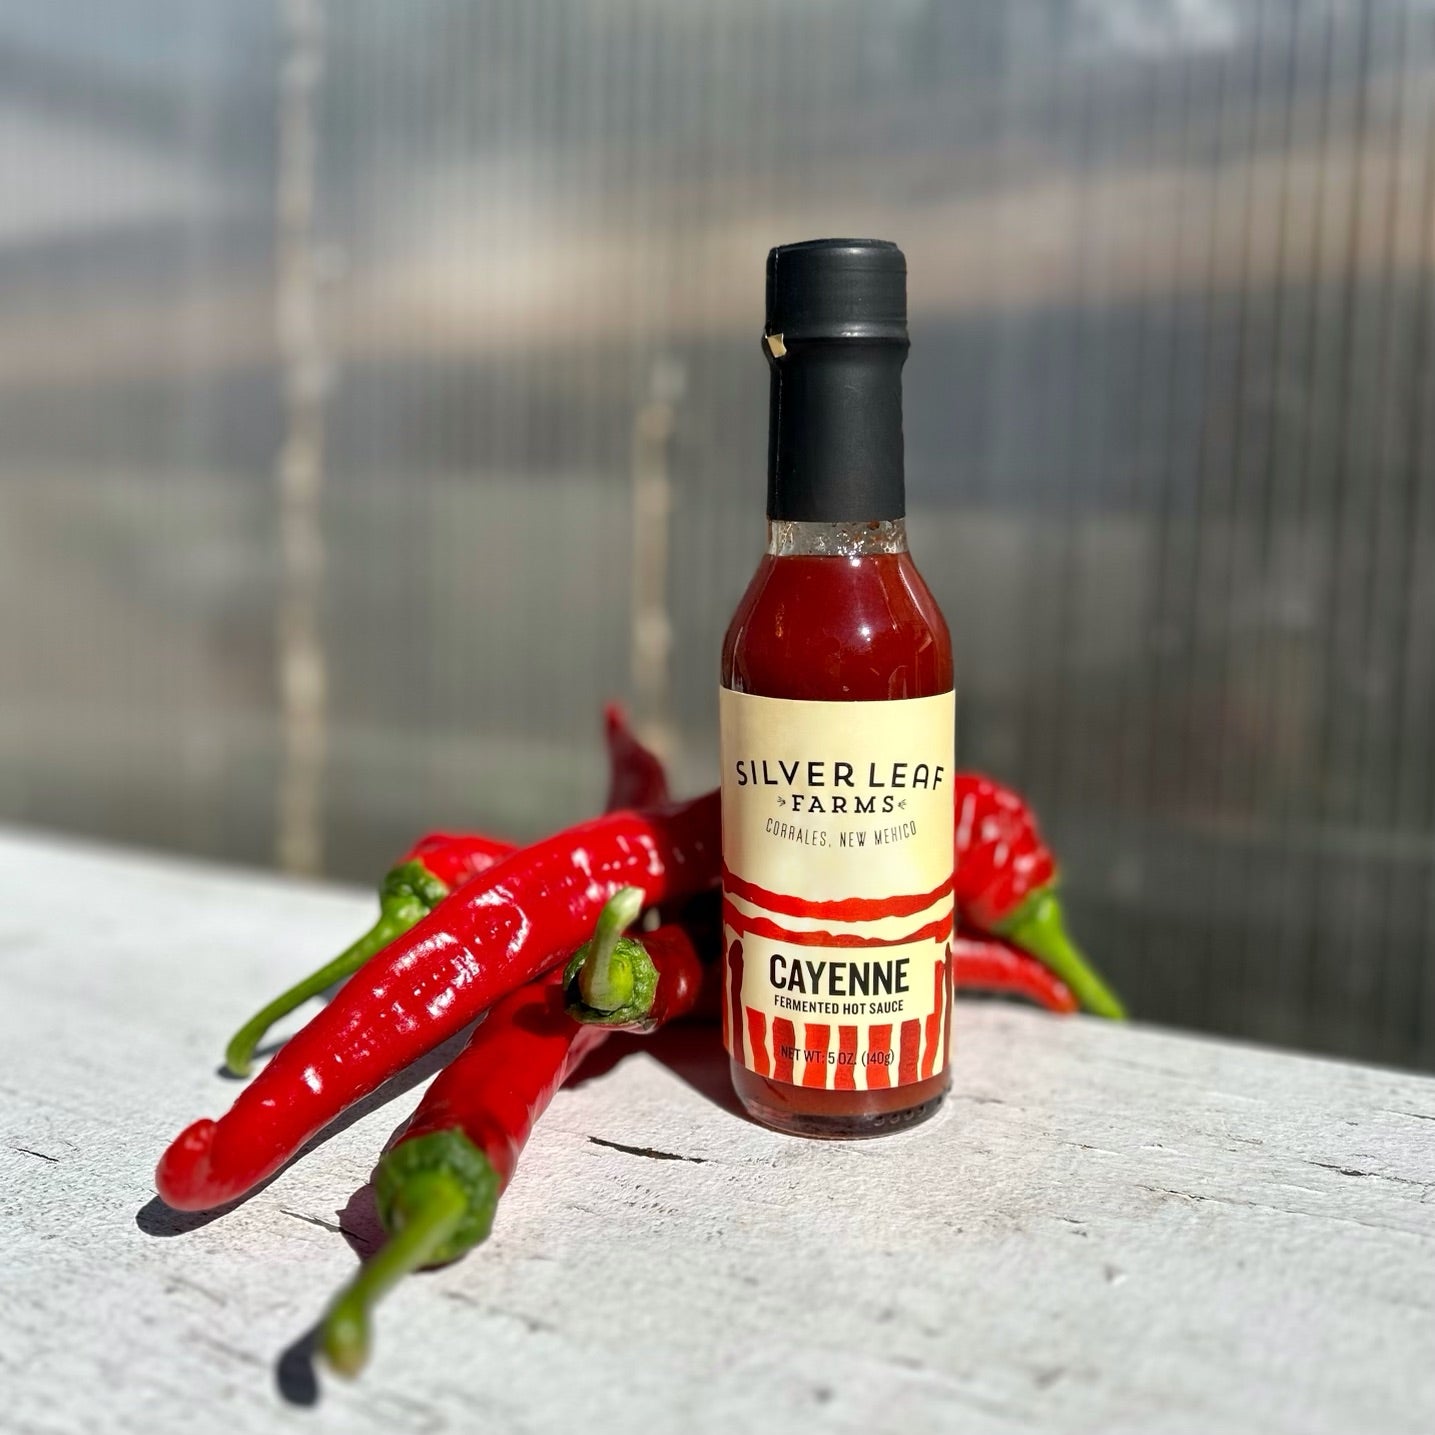 Silver Leaf Farms Cayenne Fermented Hot Sauce bottle with cayenne peppers